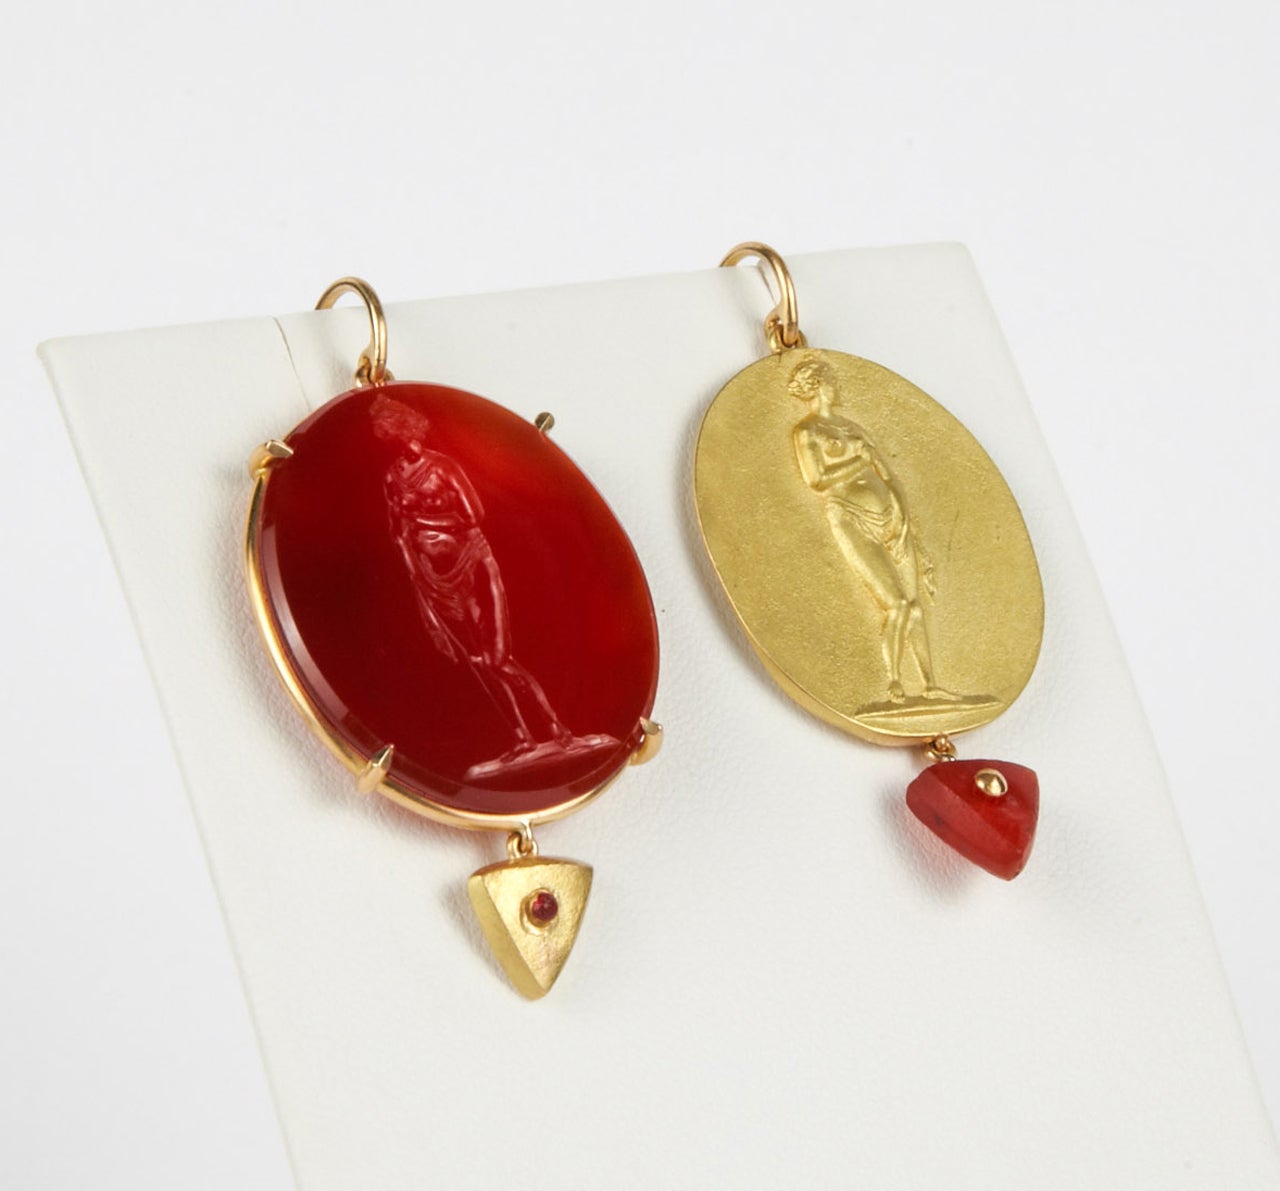 Contemporary Antique Intaglio and its Impression Earrings